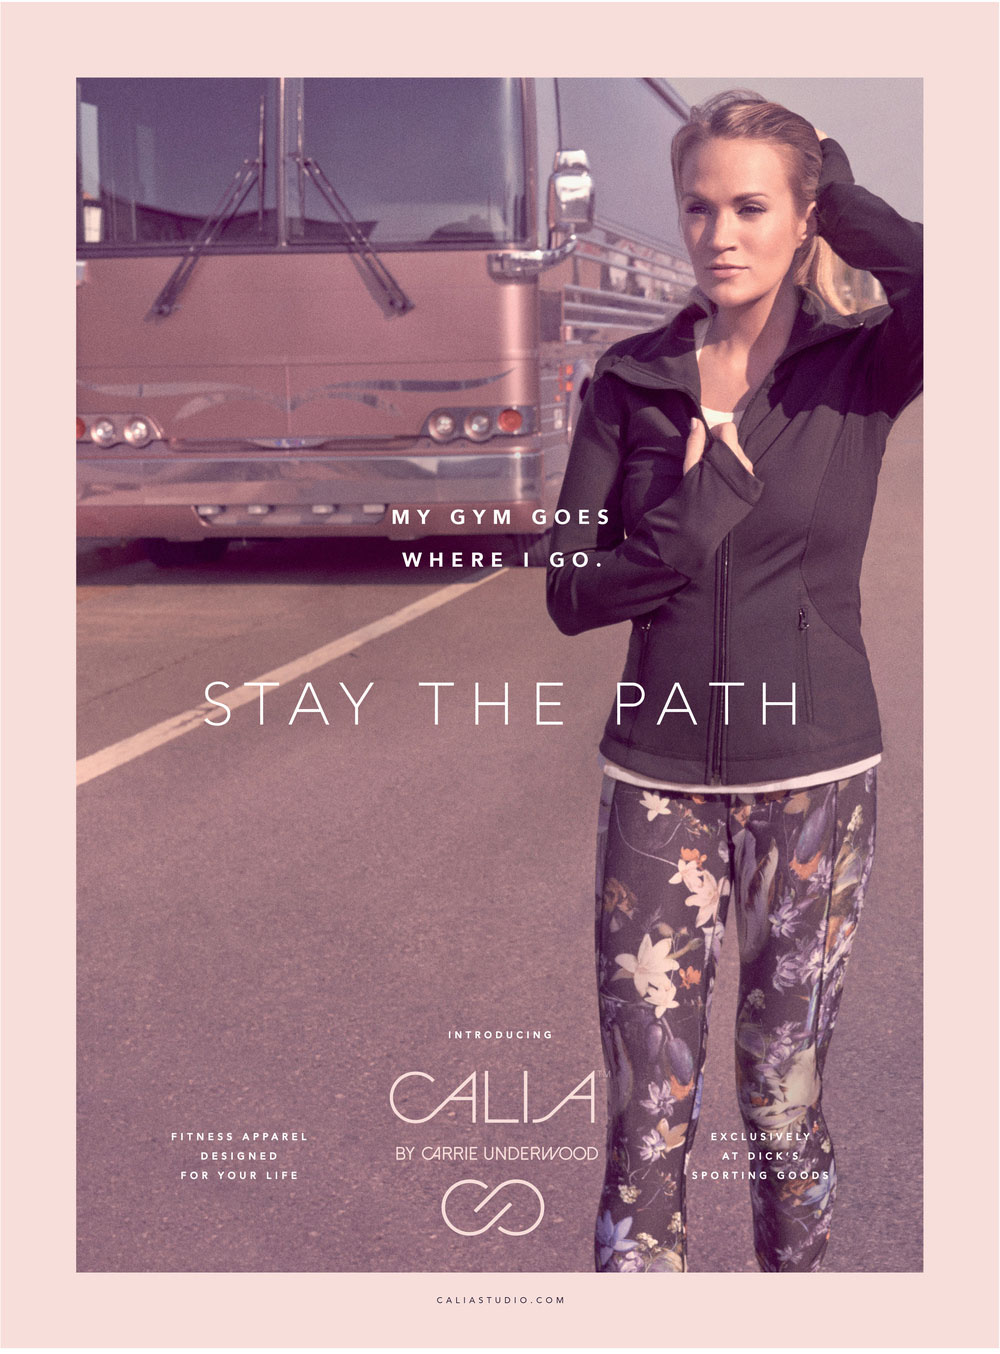 2015 Magazine Advertisement Page Calia Fitness Apparel Carrie Underwood  Print Ad